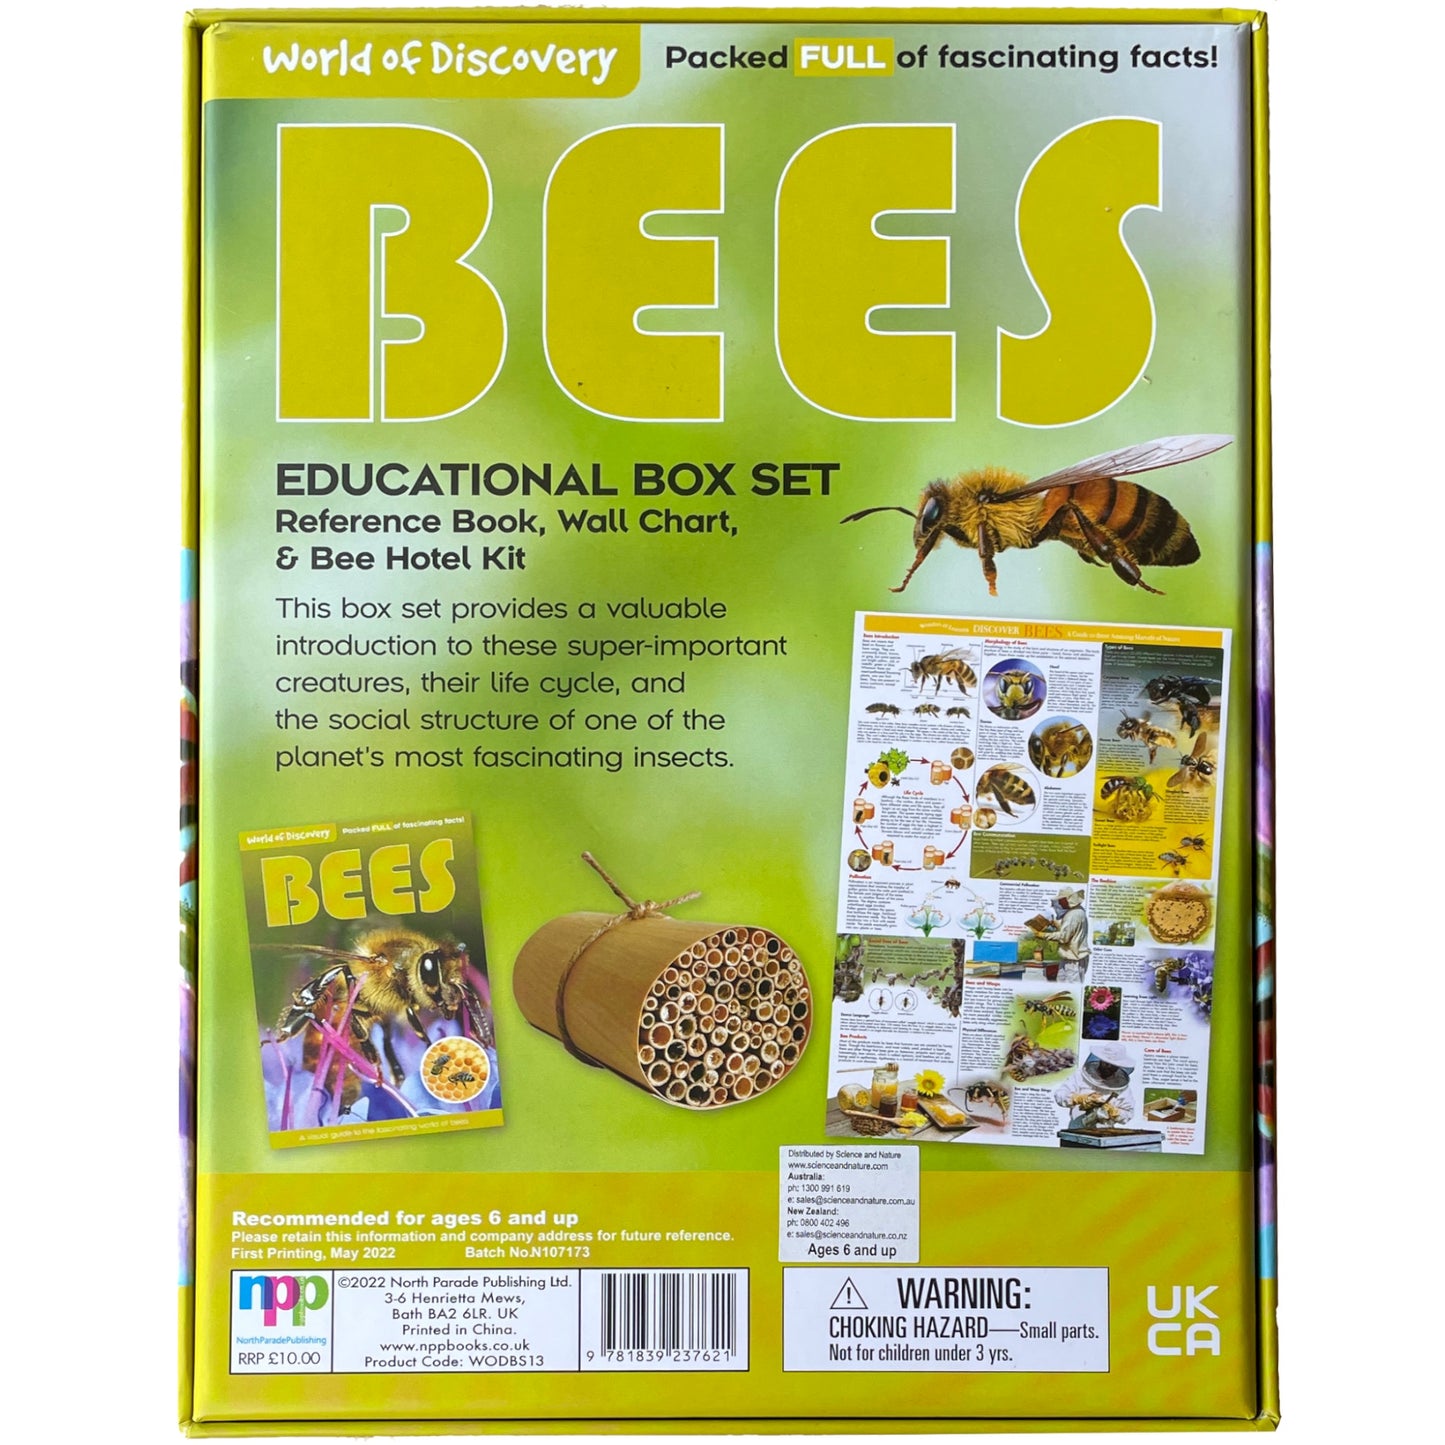 World of Discovery Bees Box 2